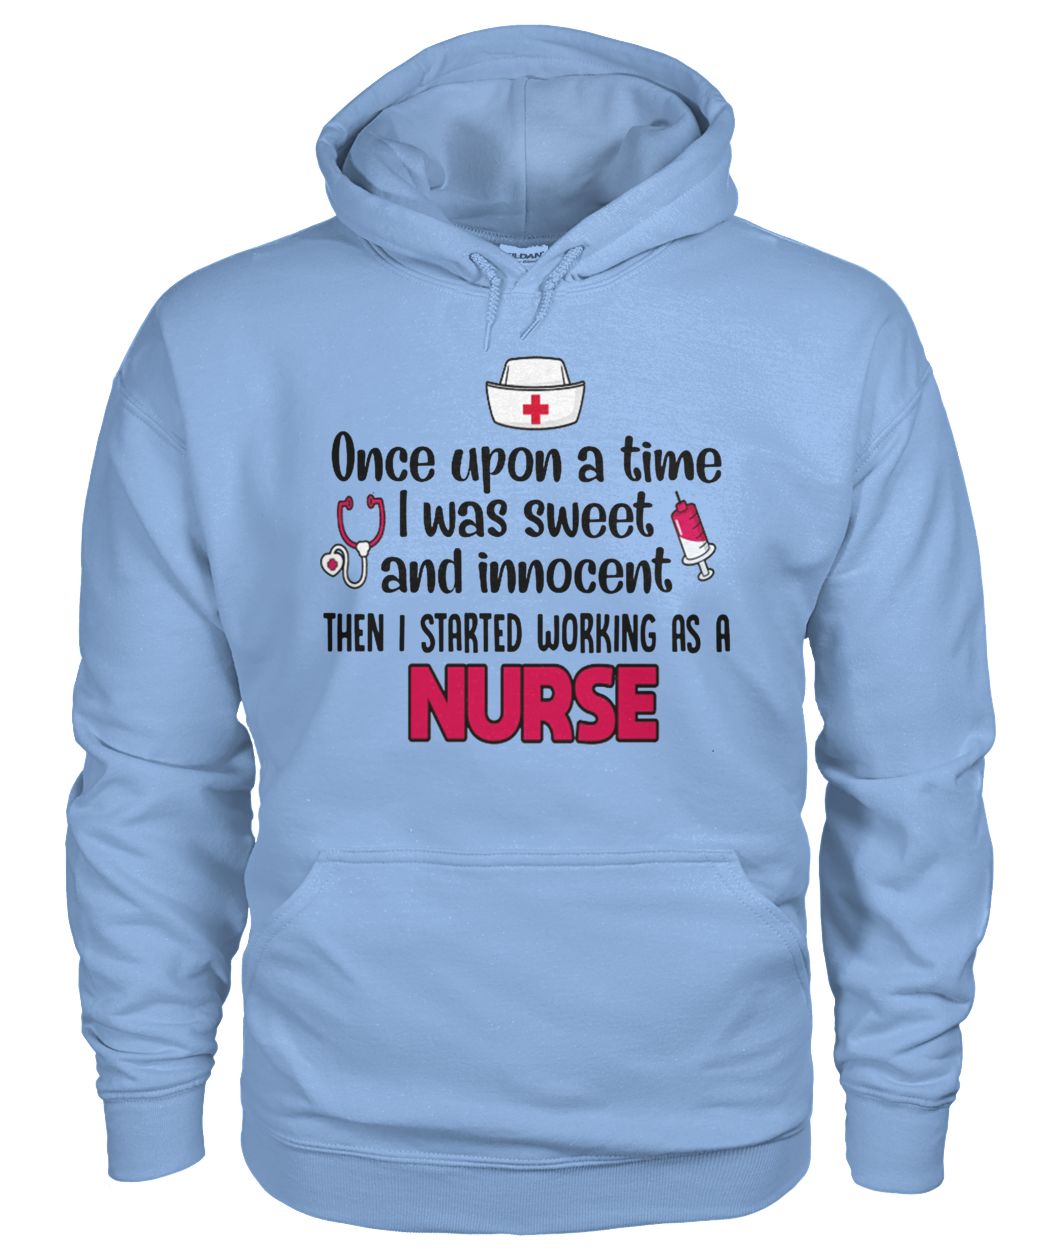 Once upon a time I was sweet and innocent then I started working as a nurse gildan hoodie